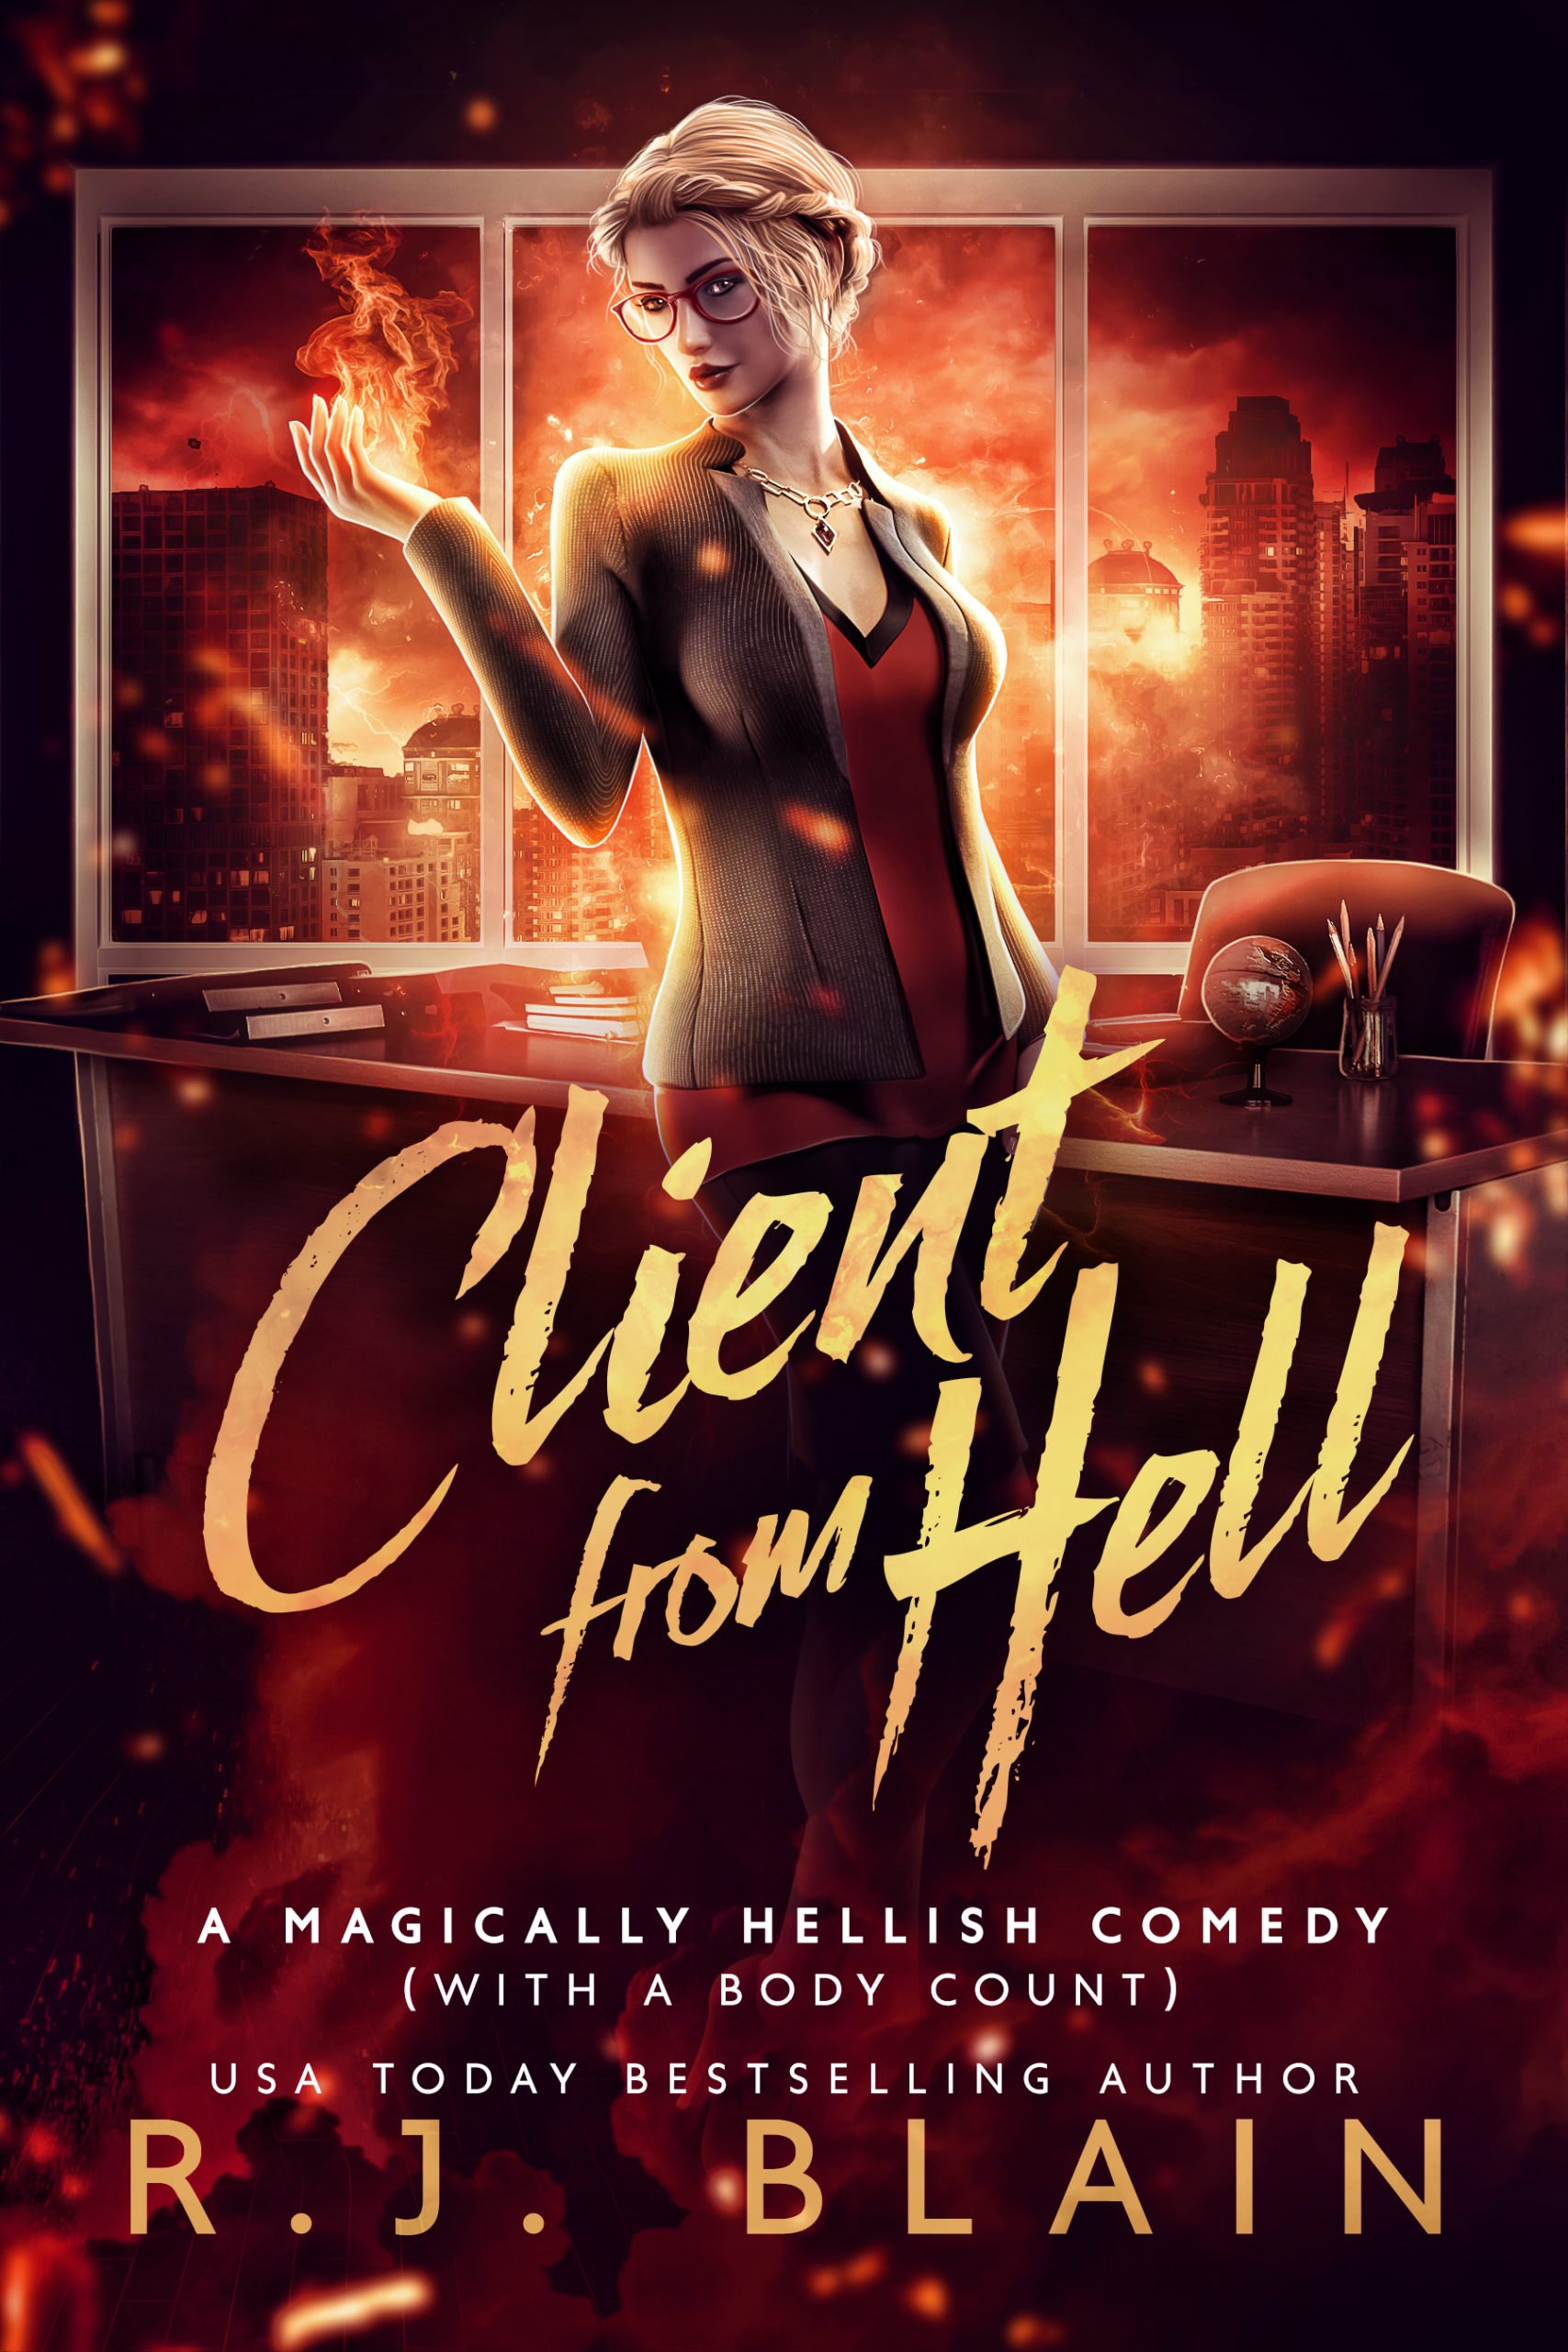 New Client from Hell Release Date